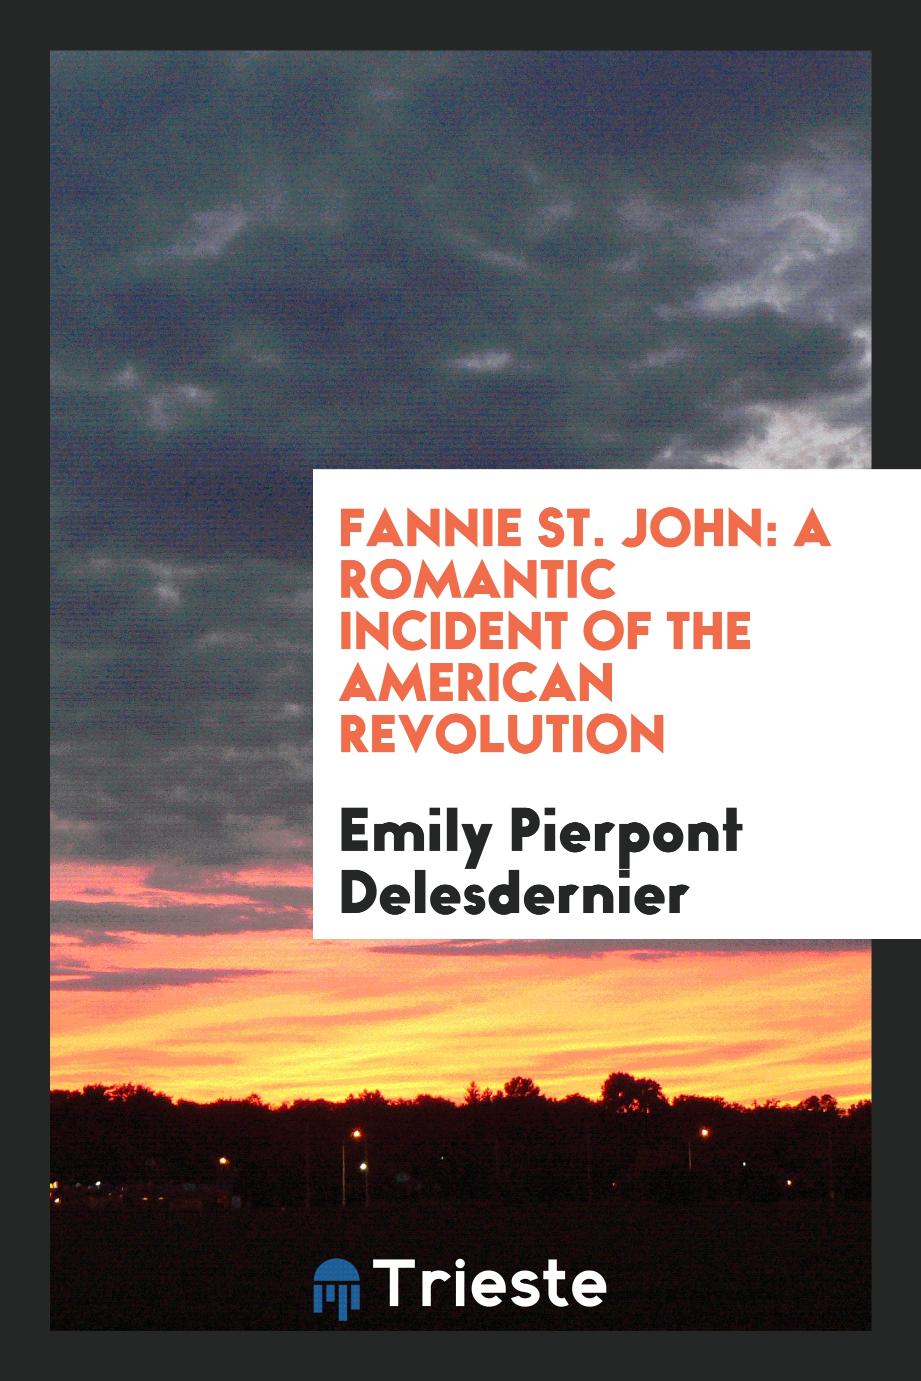 Fannie St. John: A Romantic Incident of the American Revolution